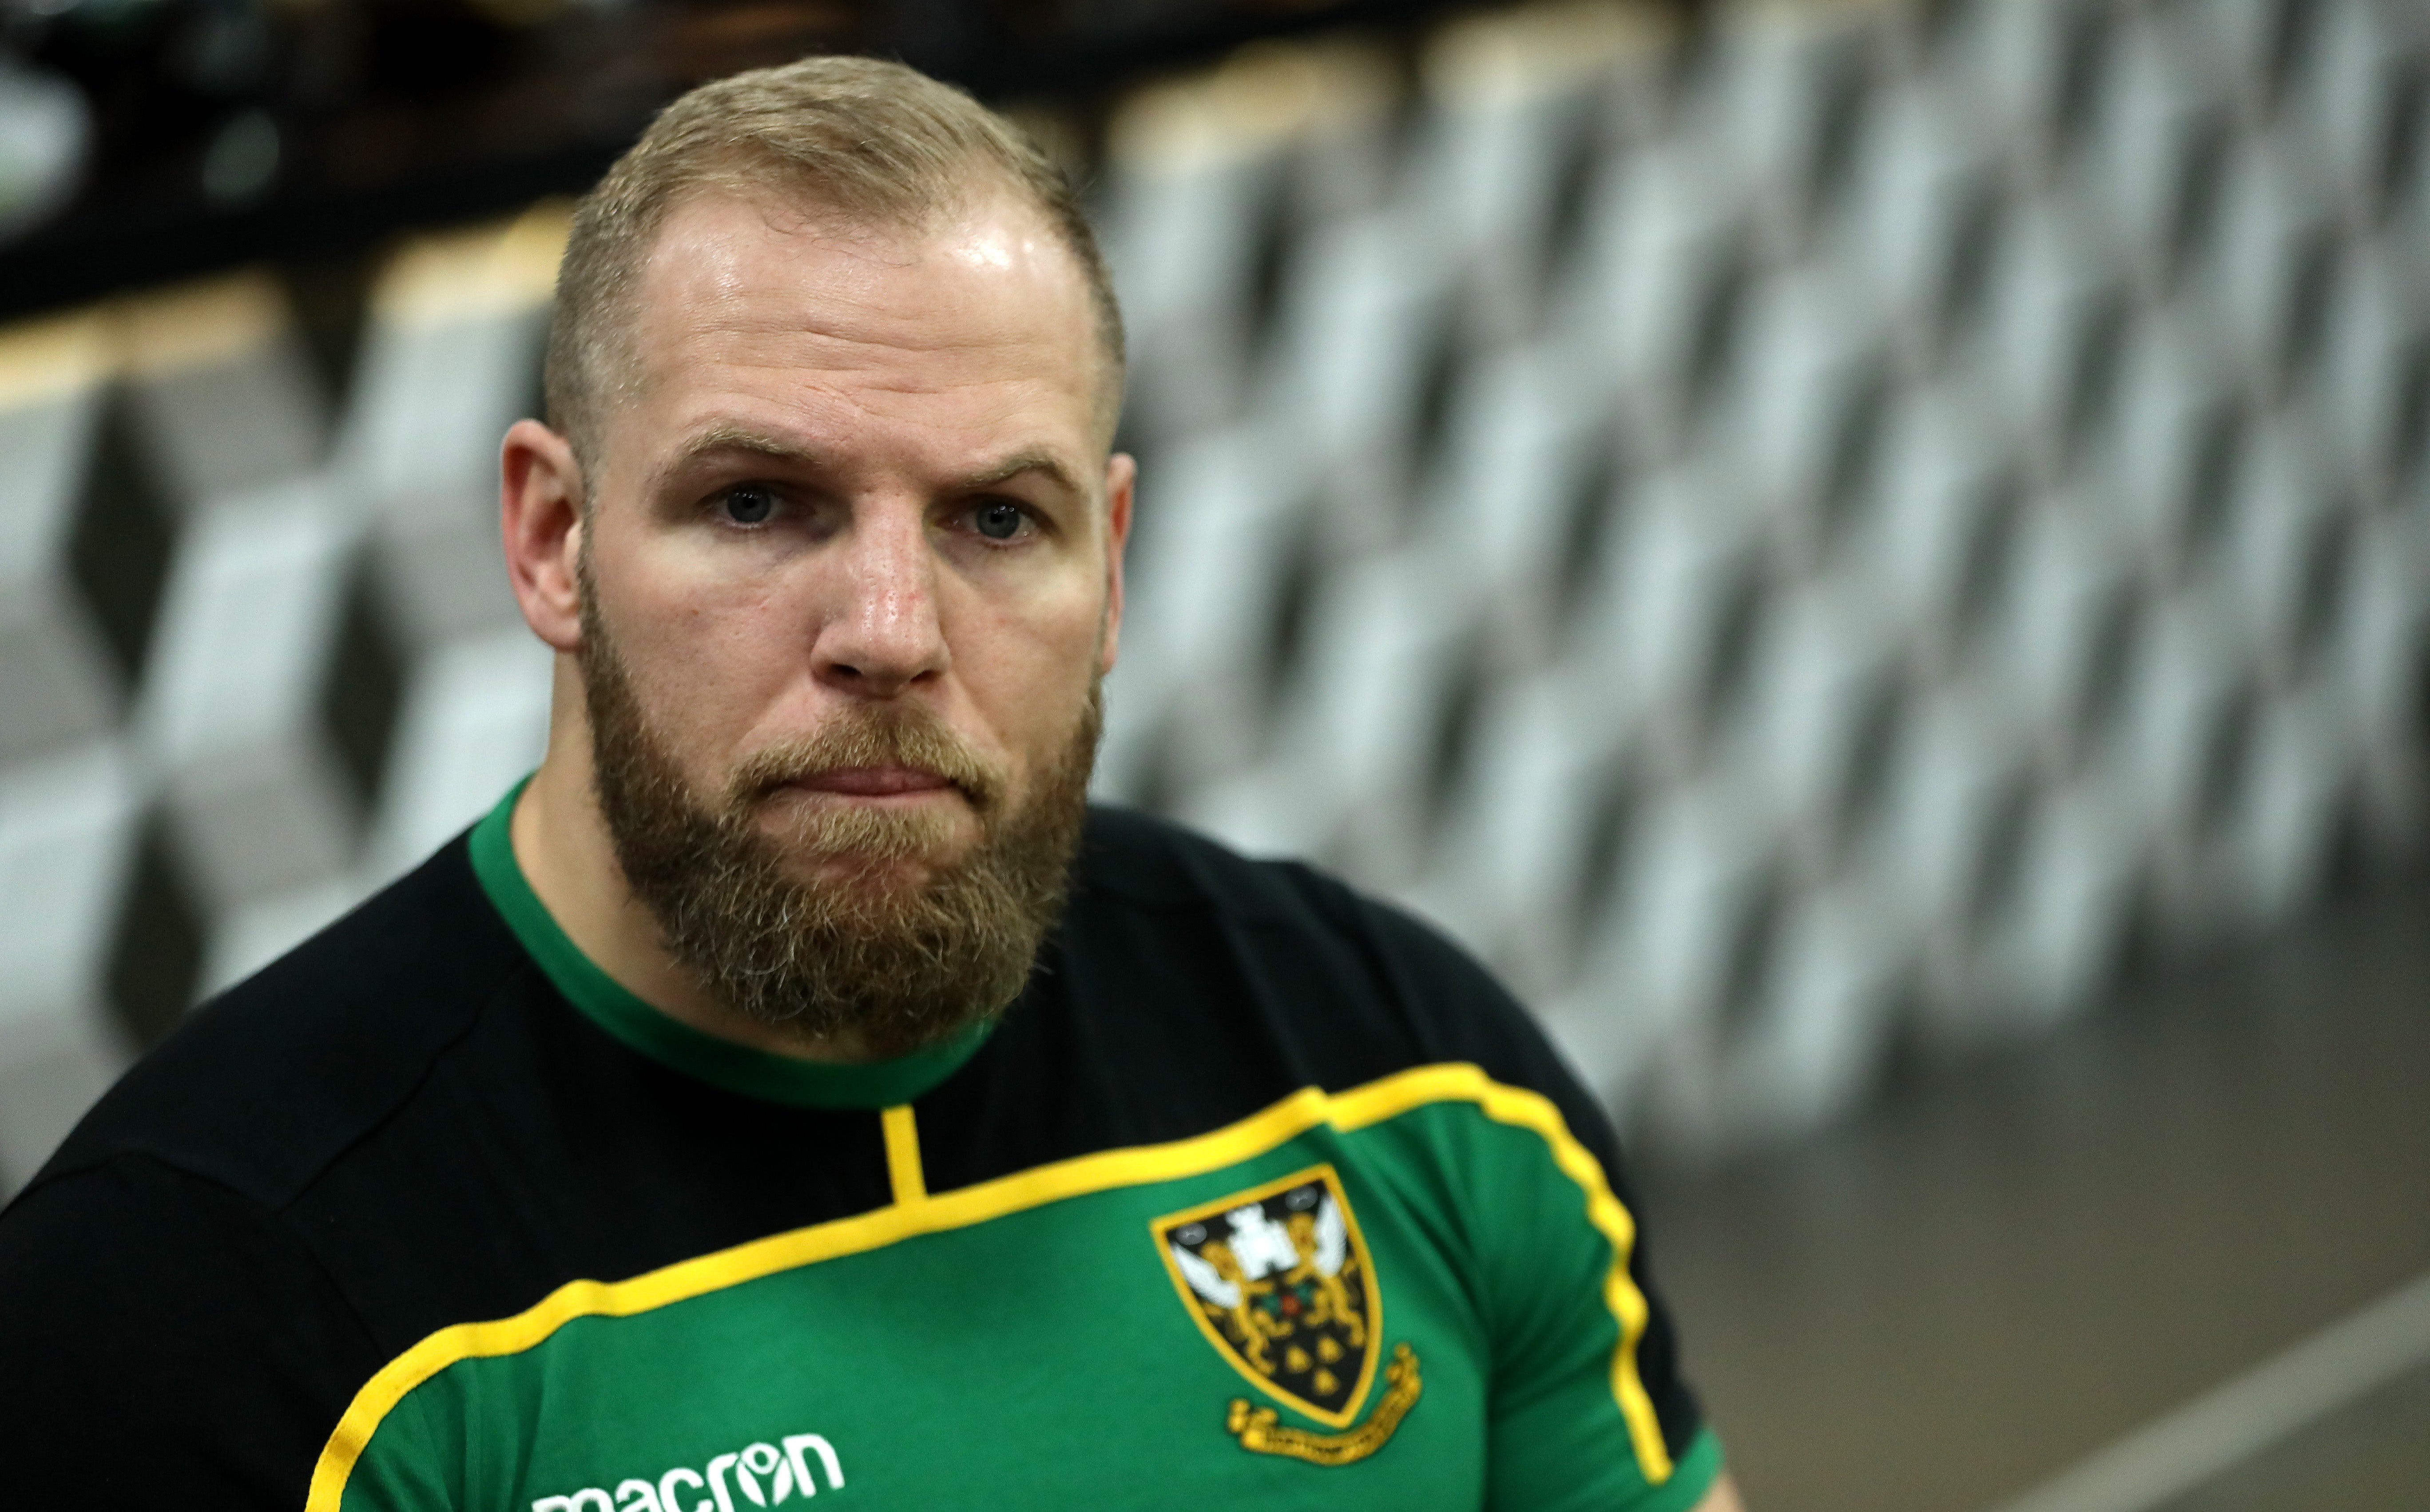 James Haskell told Simi Pam to ‘have a day off’